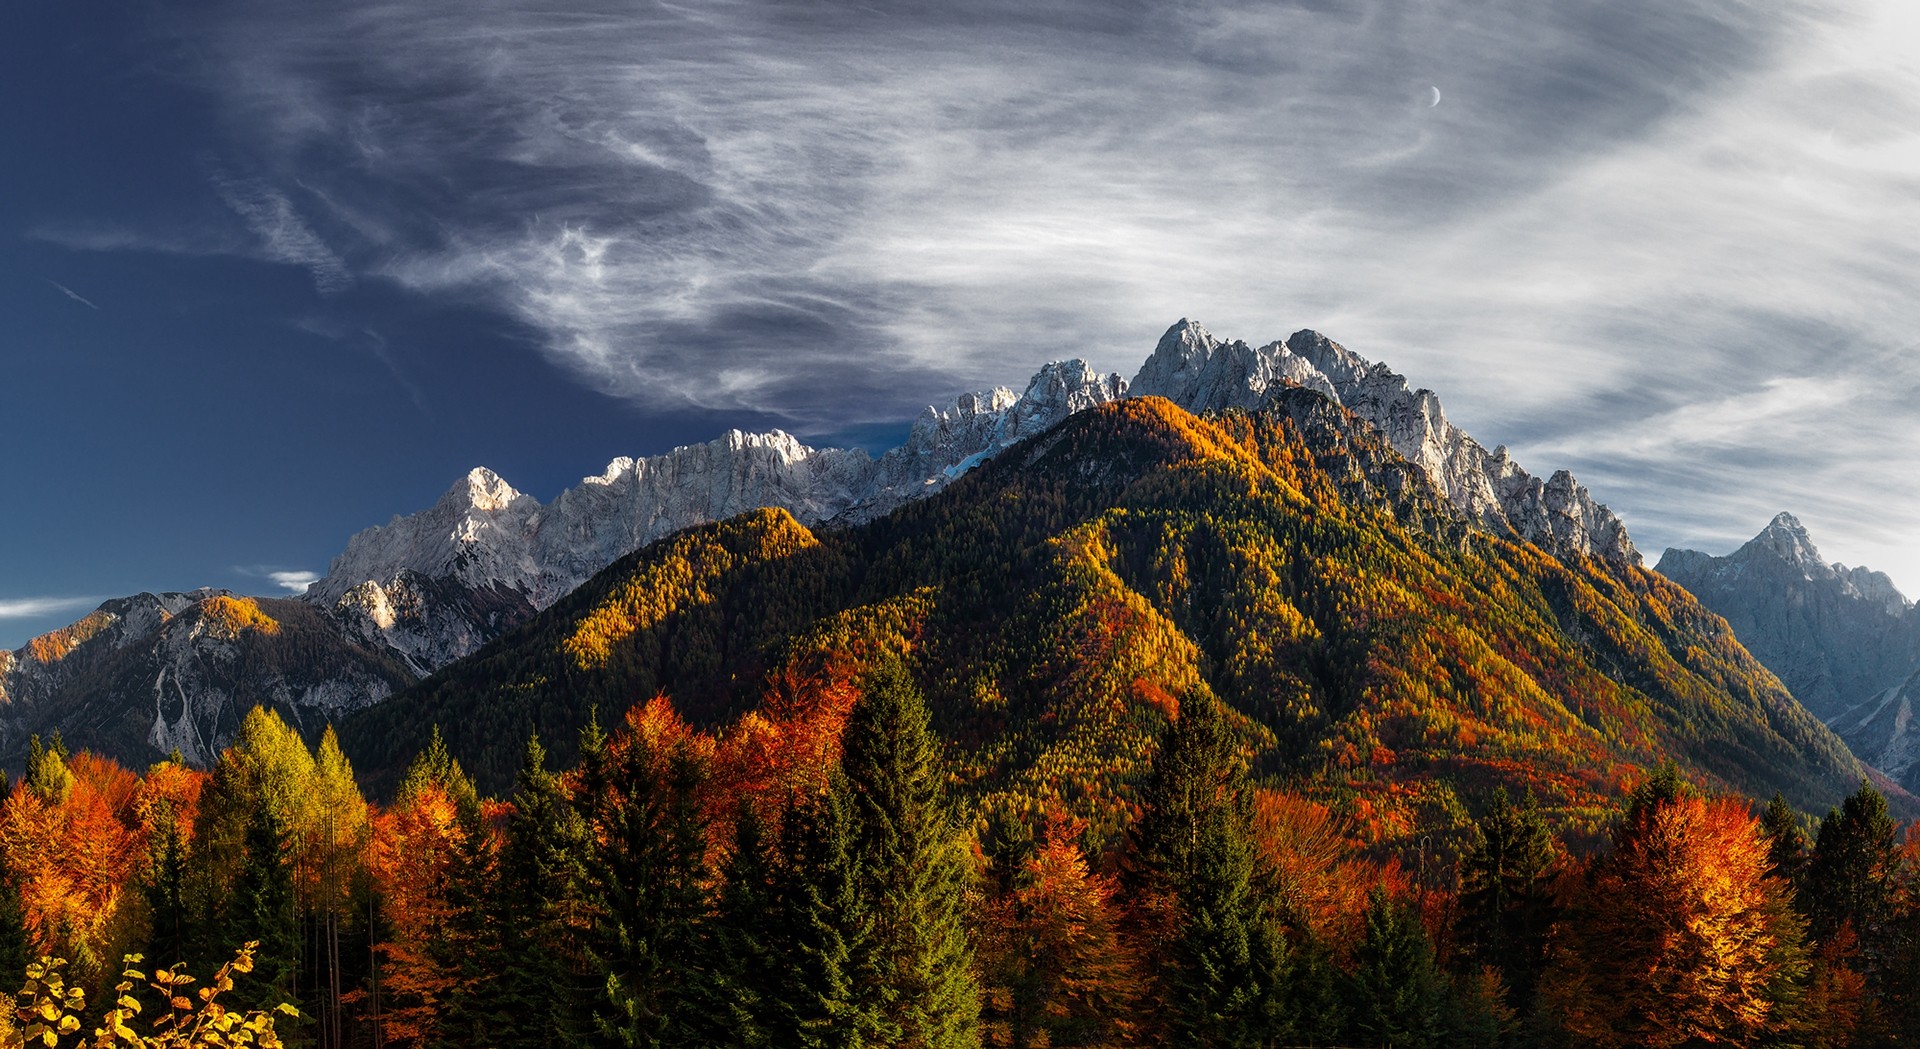 General 1920x1049 nature mountains forest fall colorful landscape trees snowy peak clouds Moon Slovenia sunlight